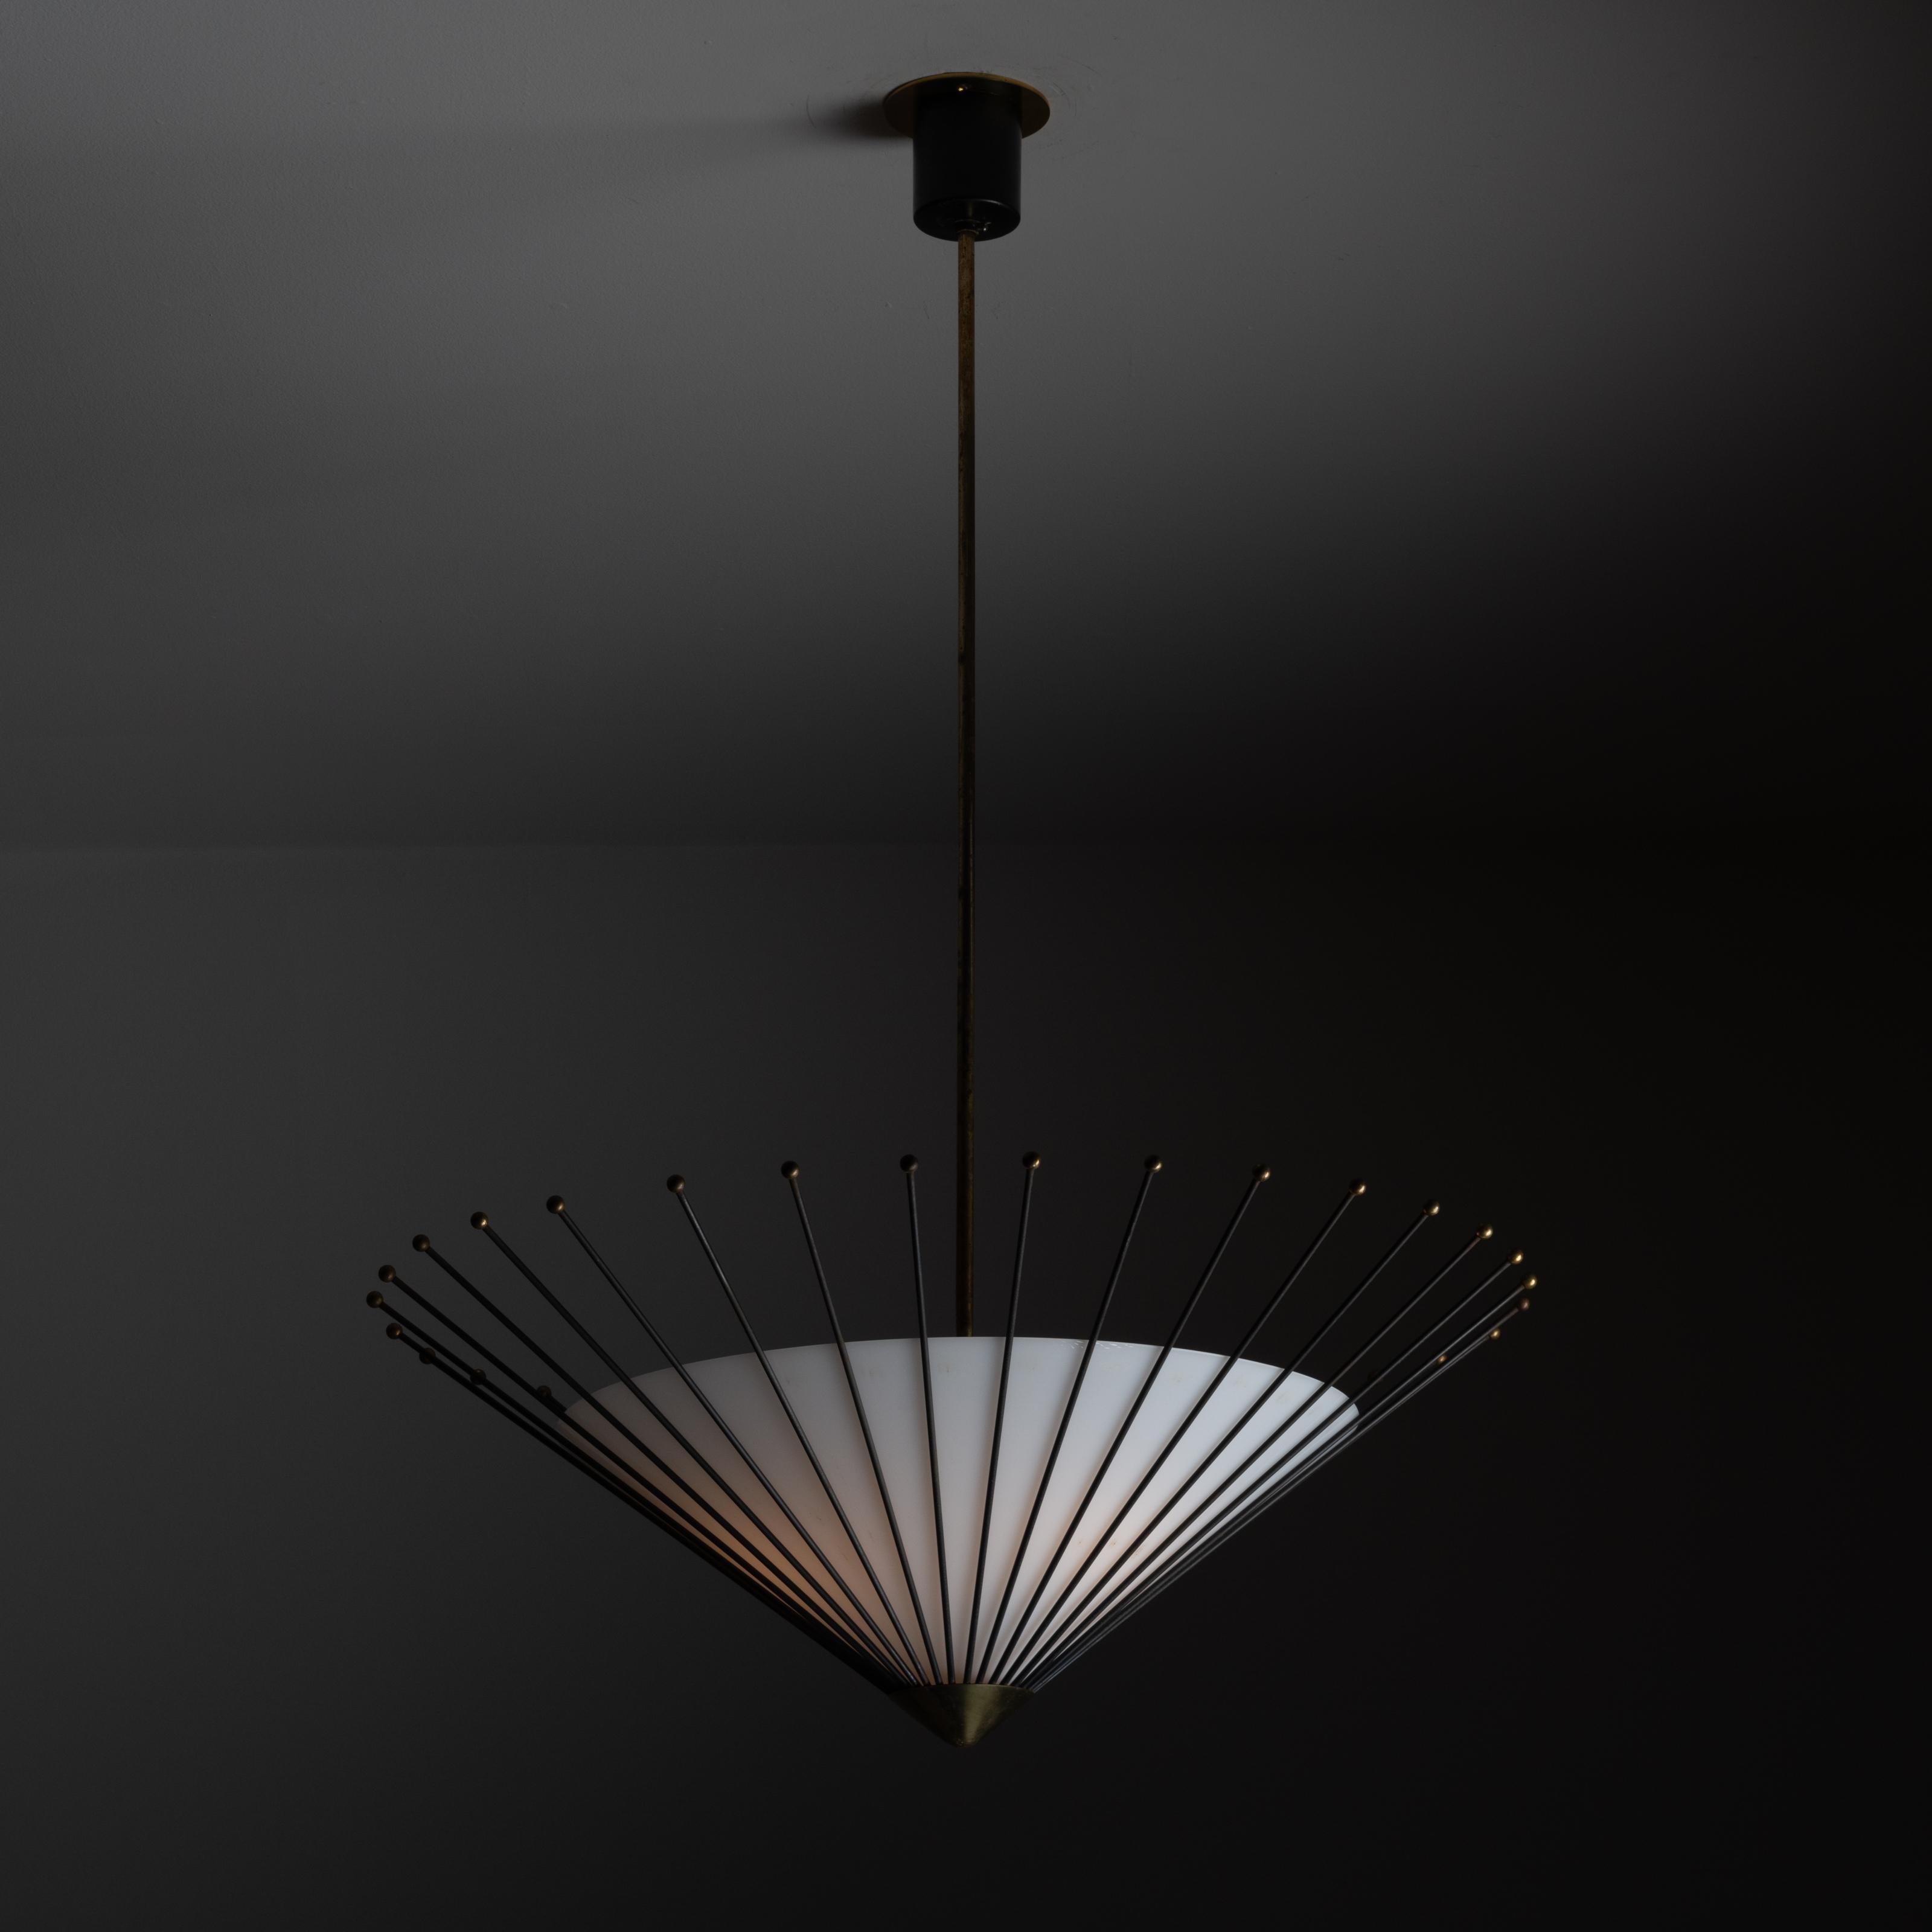 Ceiling light by Stilux. Designed and manufactured in Italy, circa 1960's. Opal glass diffuser. Enameled rod incasement for a striking look from all angles. Shade is suspended by a solid brass polished stem. Custom brass backplate. Wired for U.S.